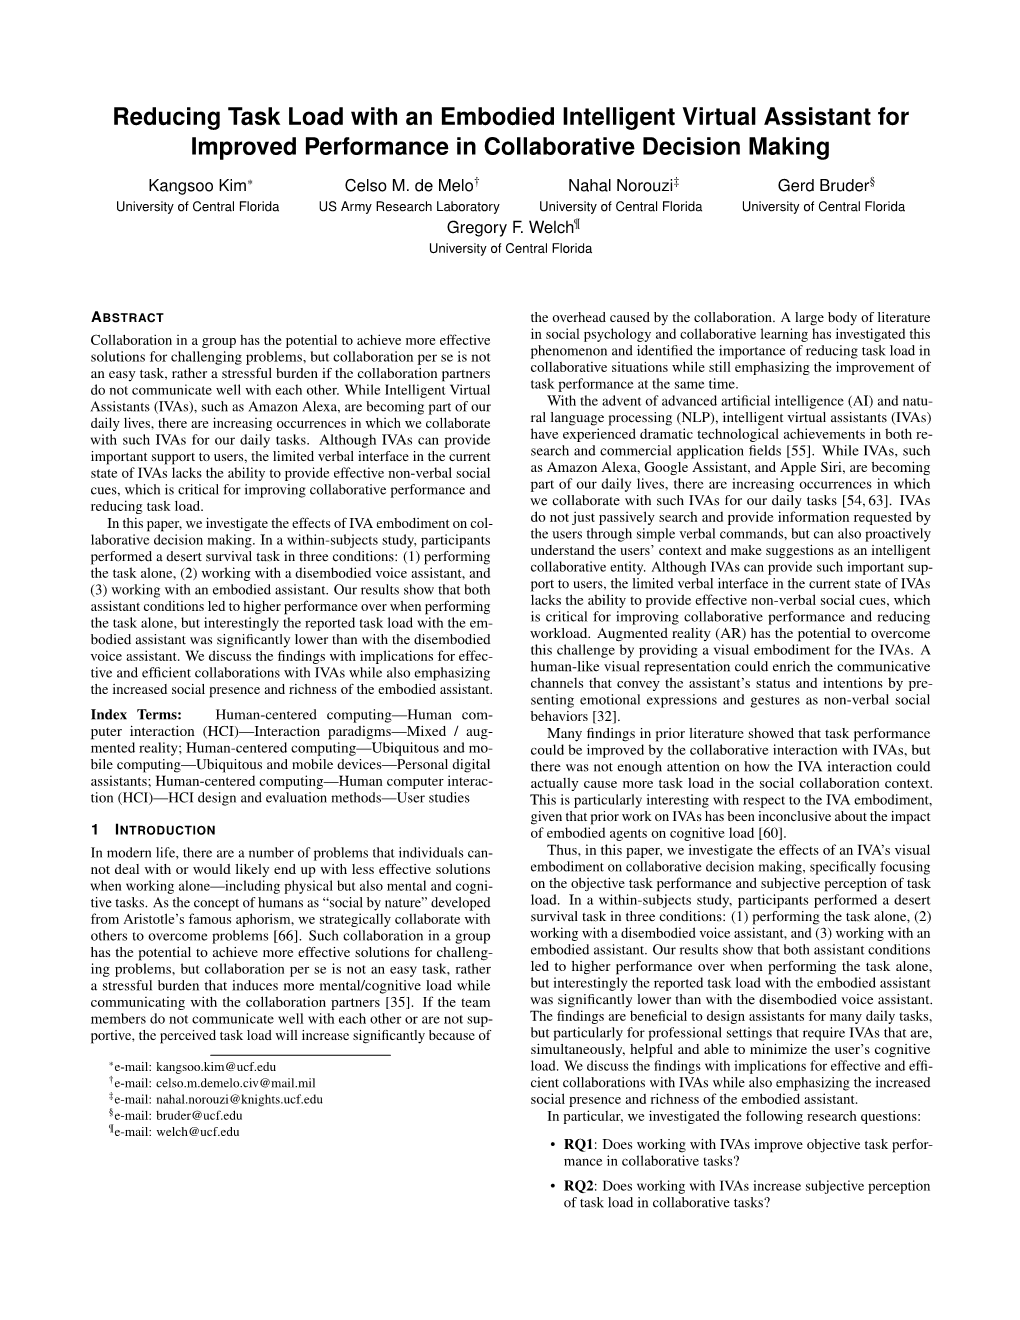 Reducing Task Load with an Embodied Intelligent Virtual Assistant for Improved Performance in Collaborative Decision Making